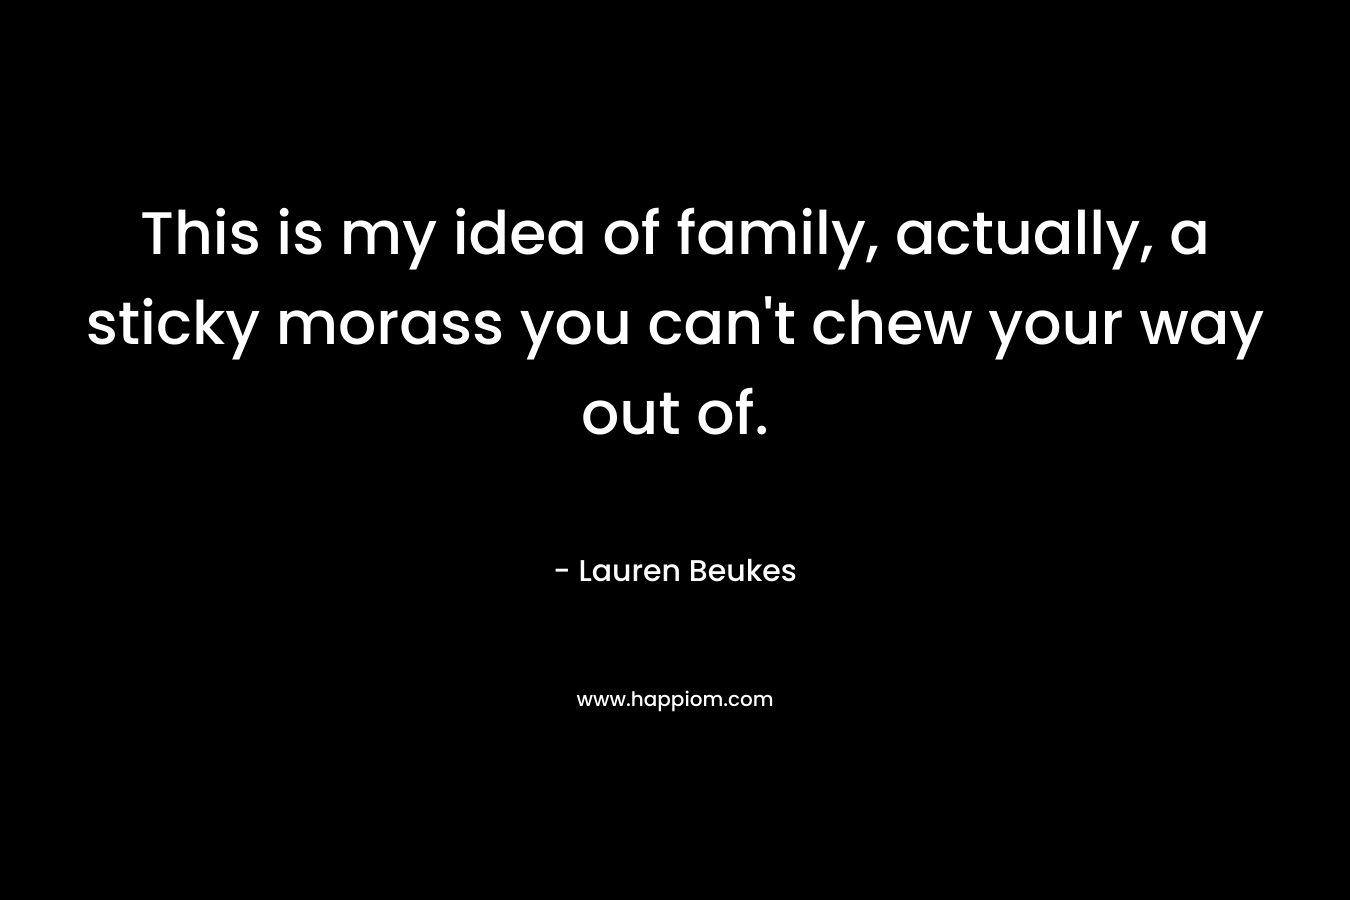 This is my idea of family, actually, a sticky morass you can’t chew your way out of. – Lauren Beukes